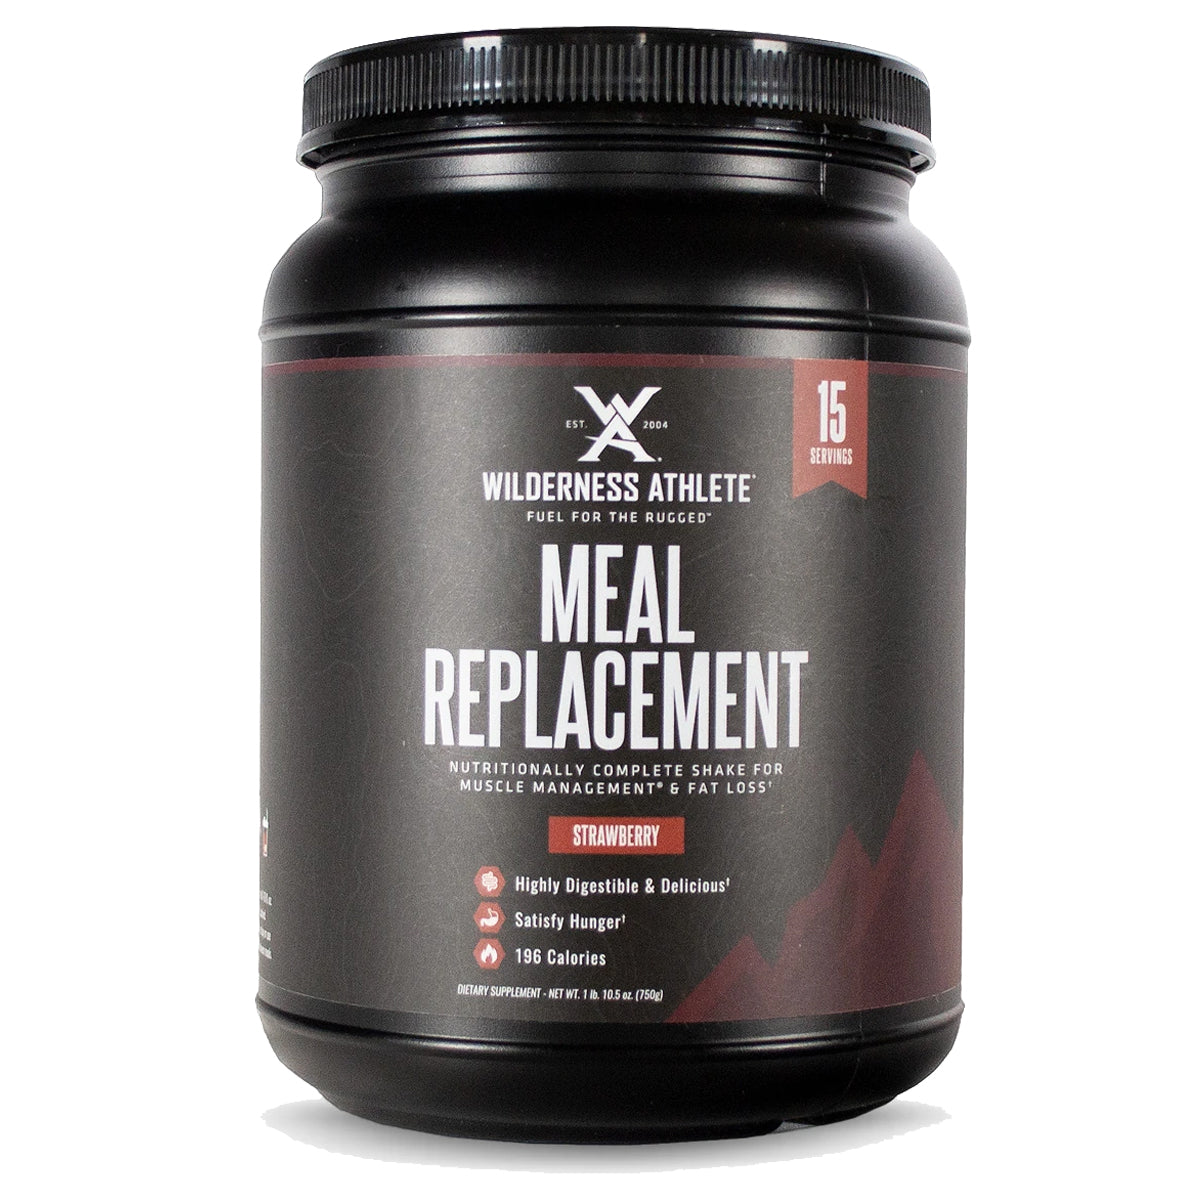 Athlete meal replacements